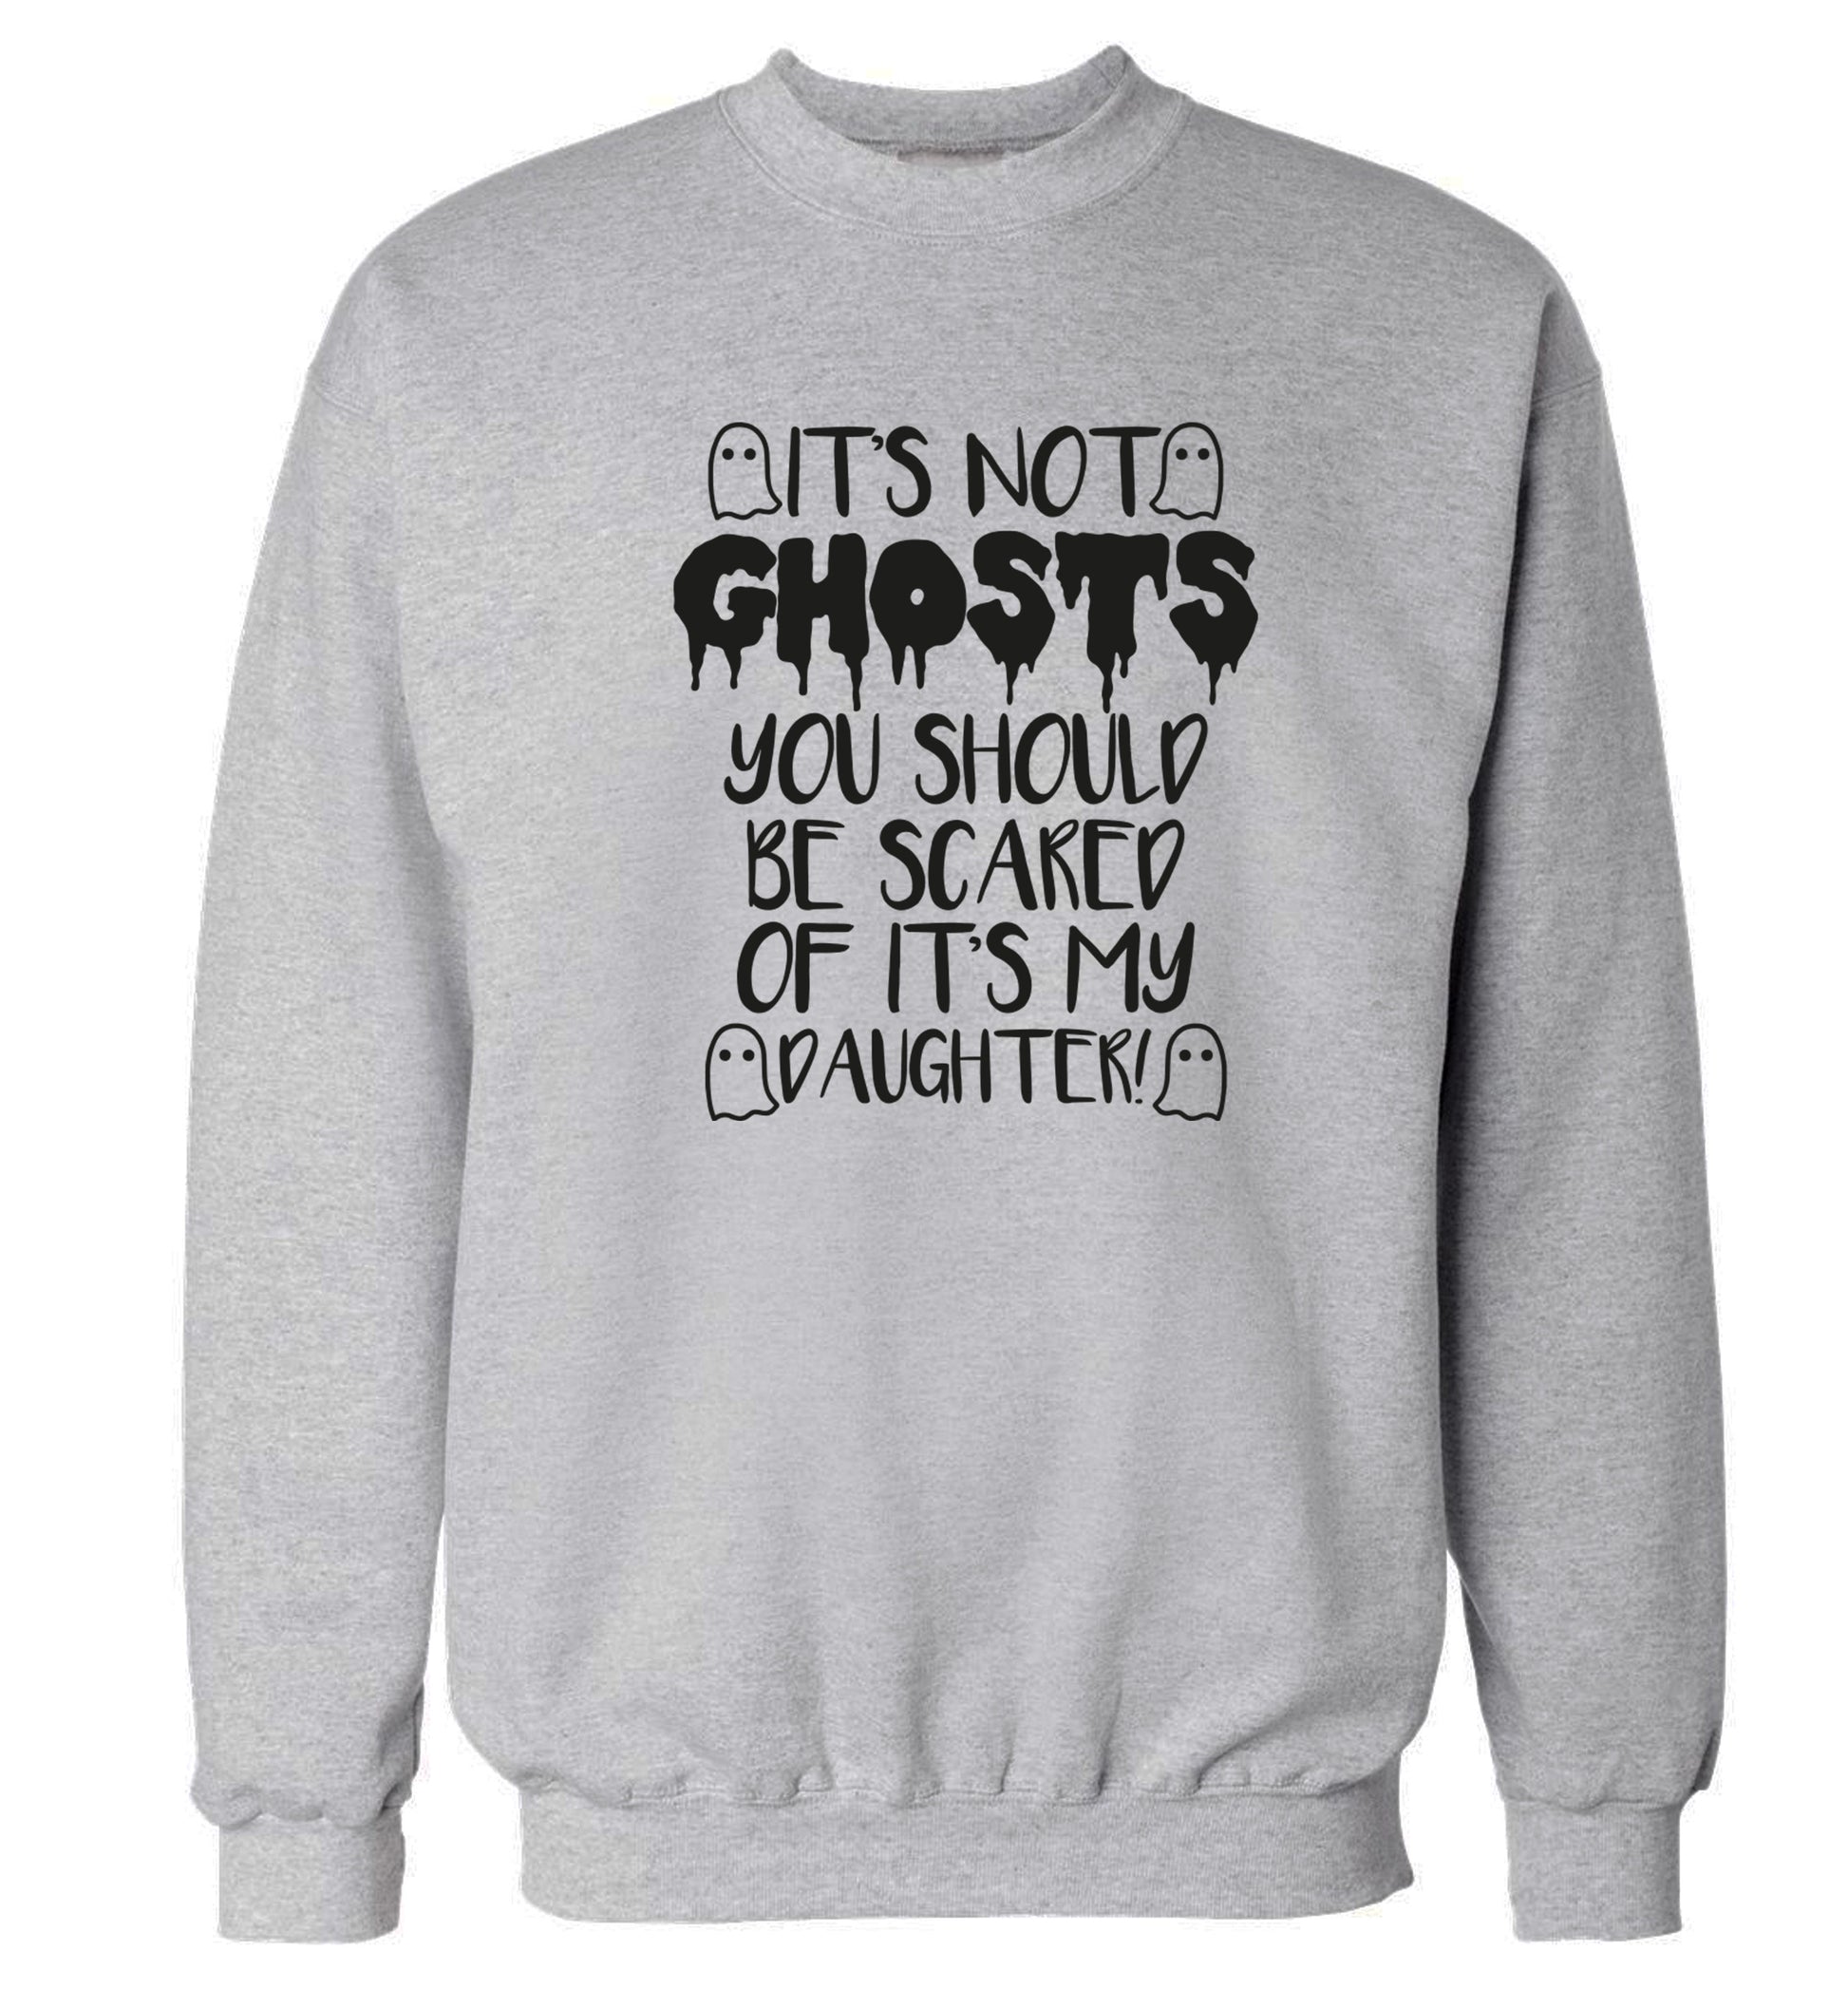 It's not ghosts you should be scared of it's my daughter! Adult's unisex grey Sweater 2XL